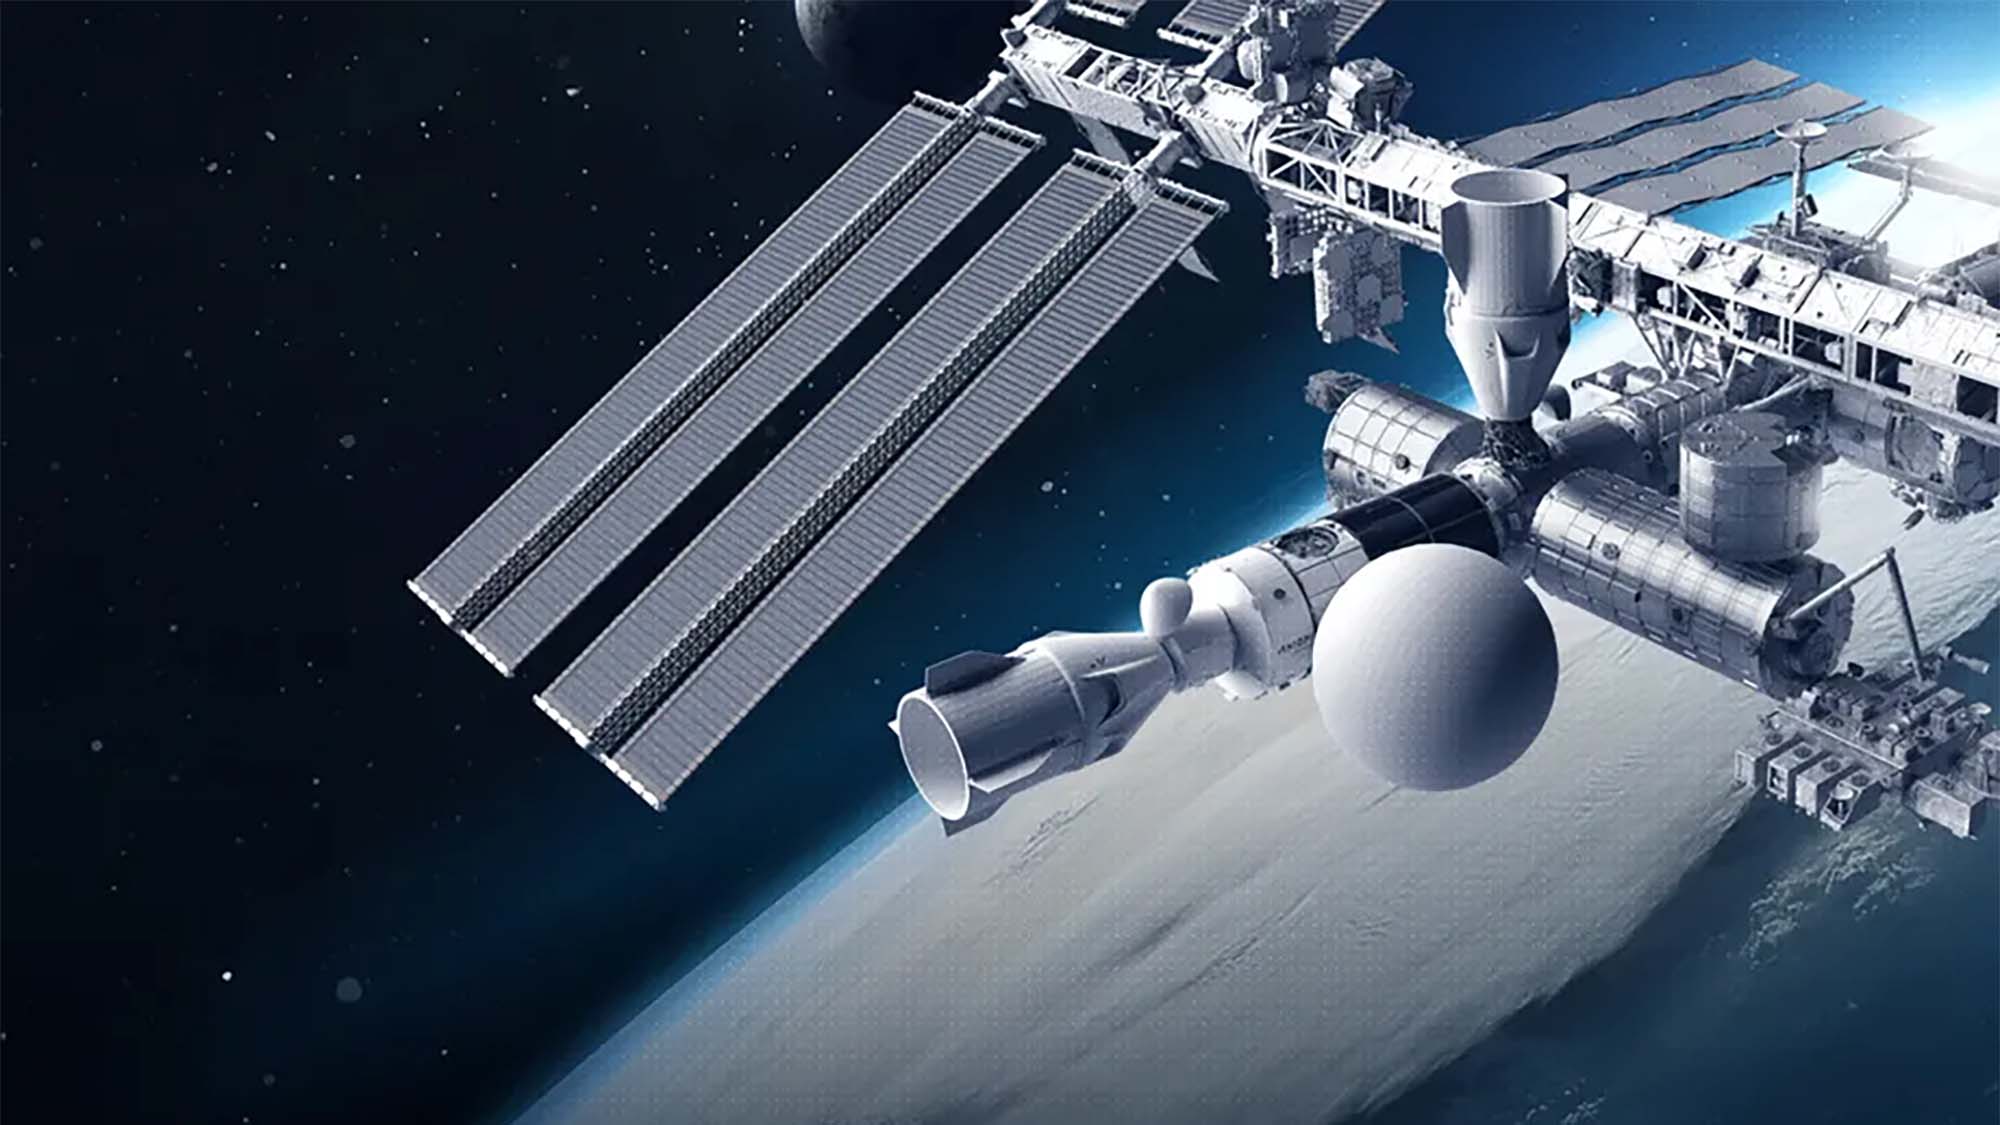 A proposed attachment to the ISS that will include a film studio.